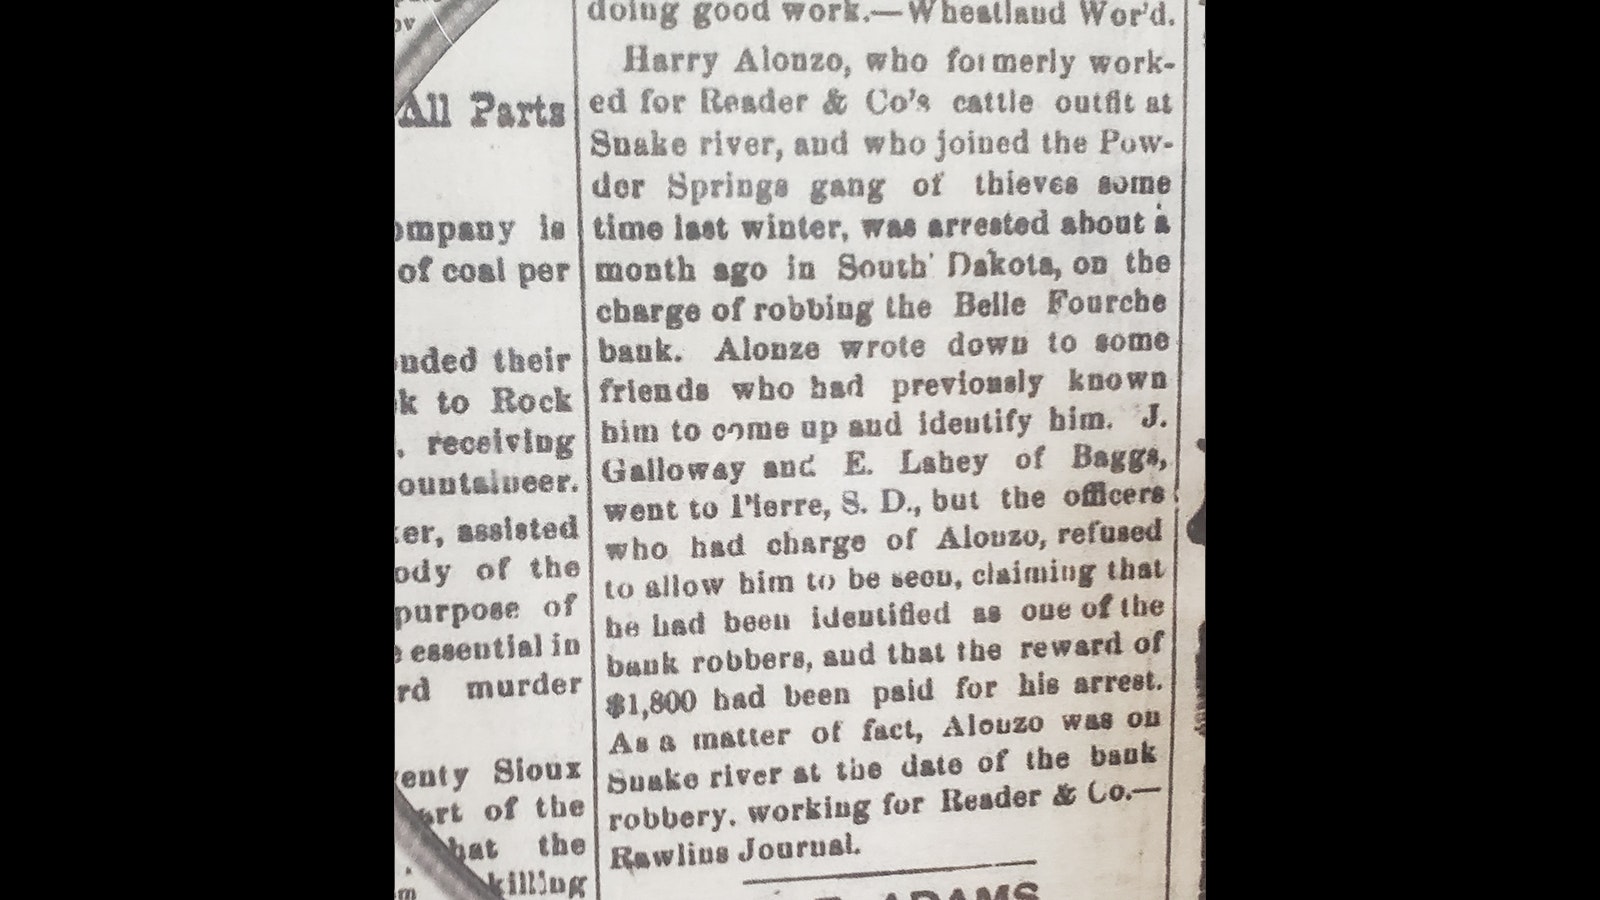 A newspaper clipping with a report from the Rawlins Journal about efforts to prove Harry Longabaugh's (aka the Sundance Kid) innocence in a robbery committed in South Dakota.